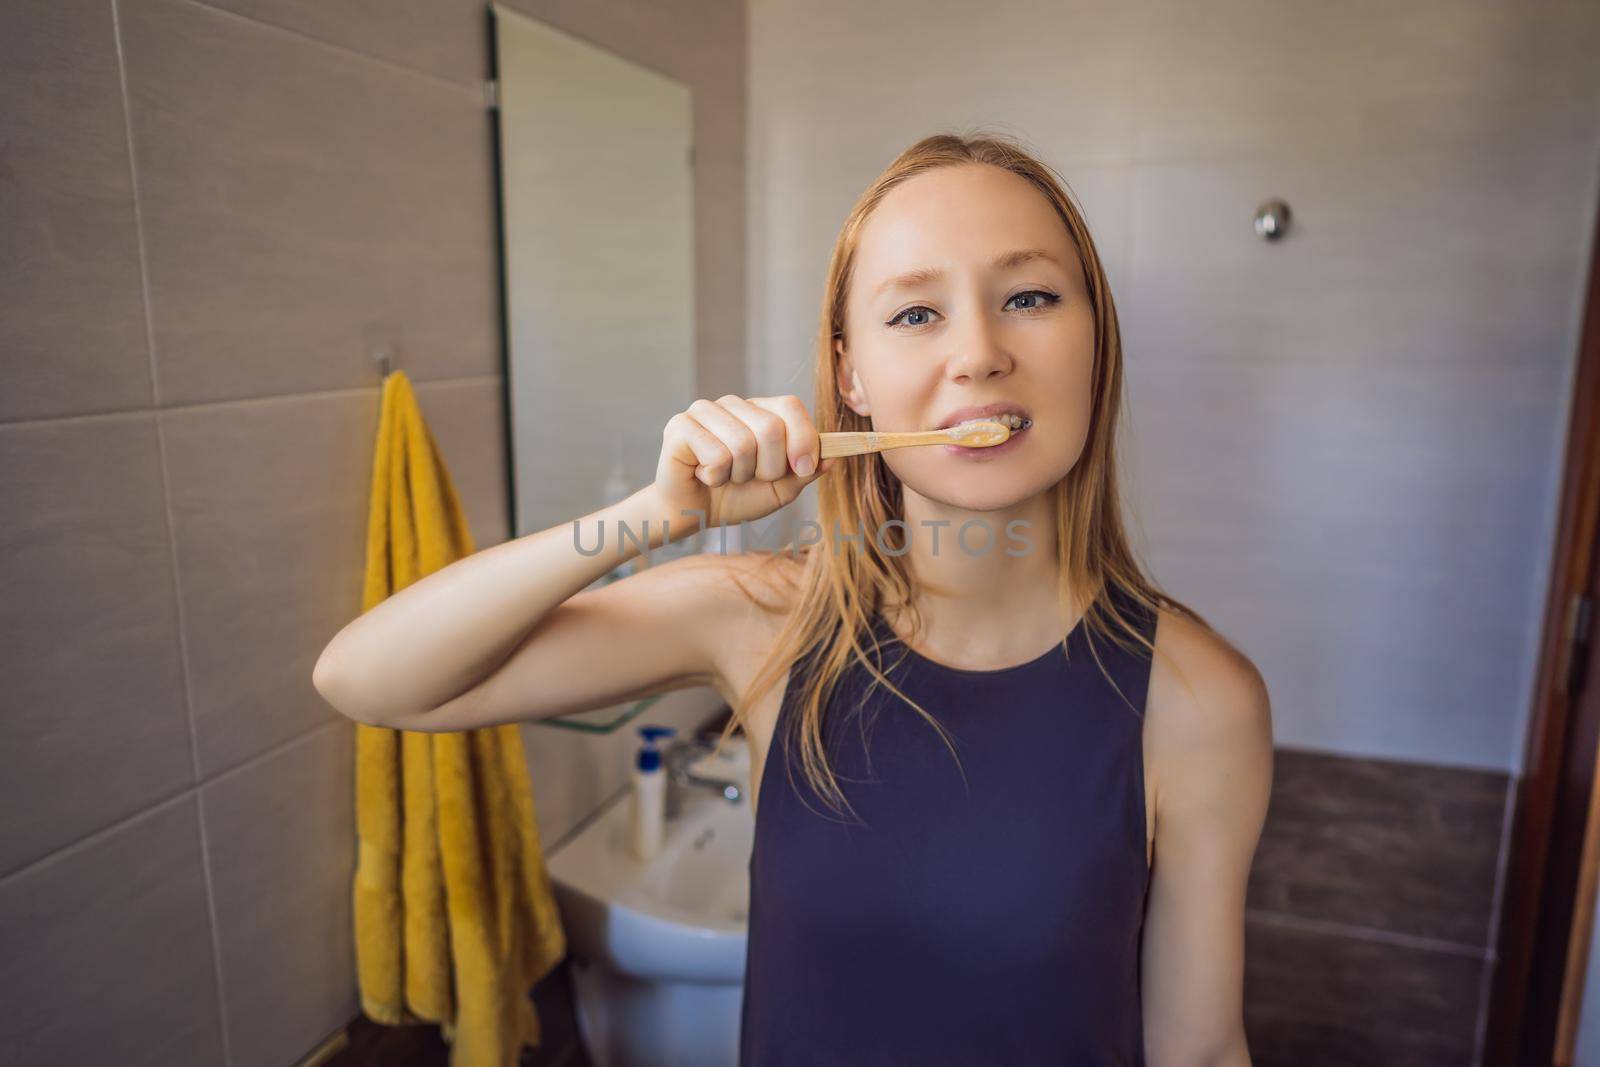 Young and caucasian woman brushing her teeth with a bamboo toothbrush.